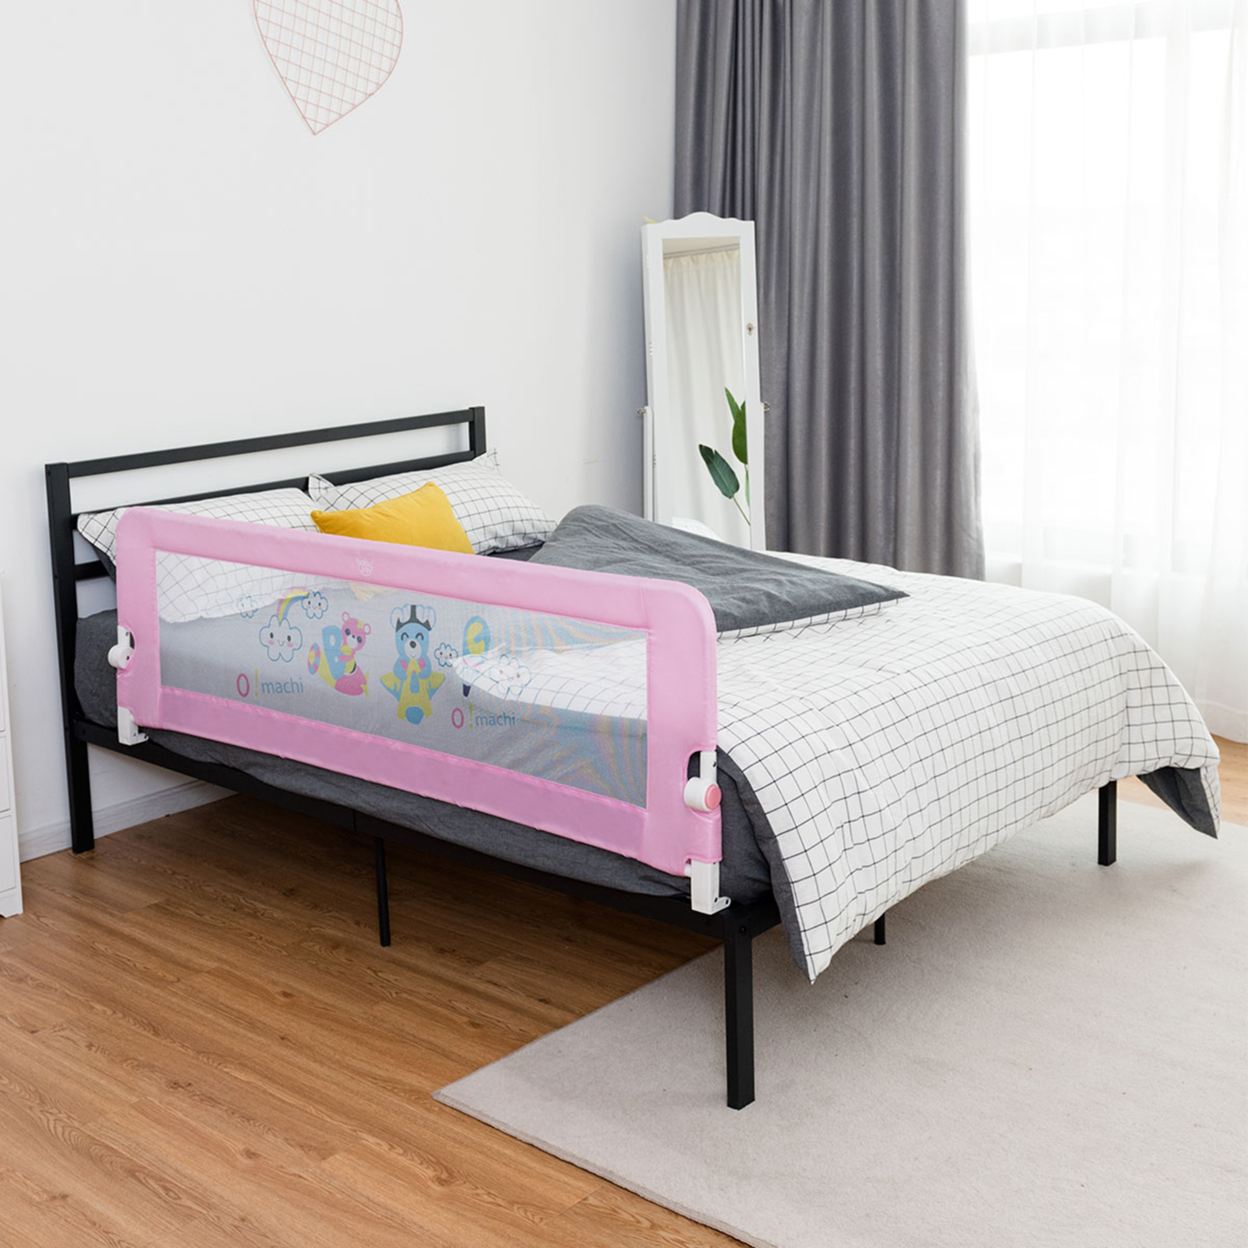 69'' Breathable Baby Children Toddlers Bed Rail Guard Safety Swing Down Pink